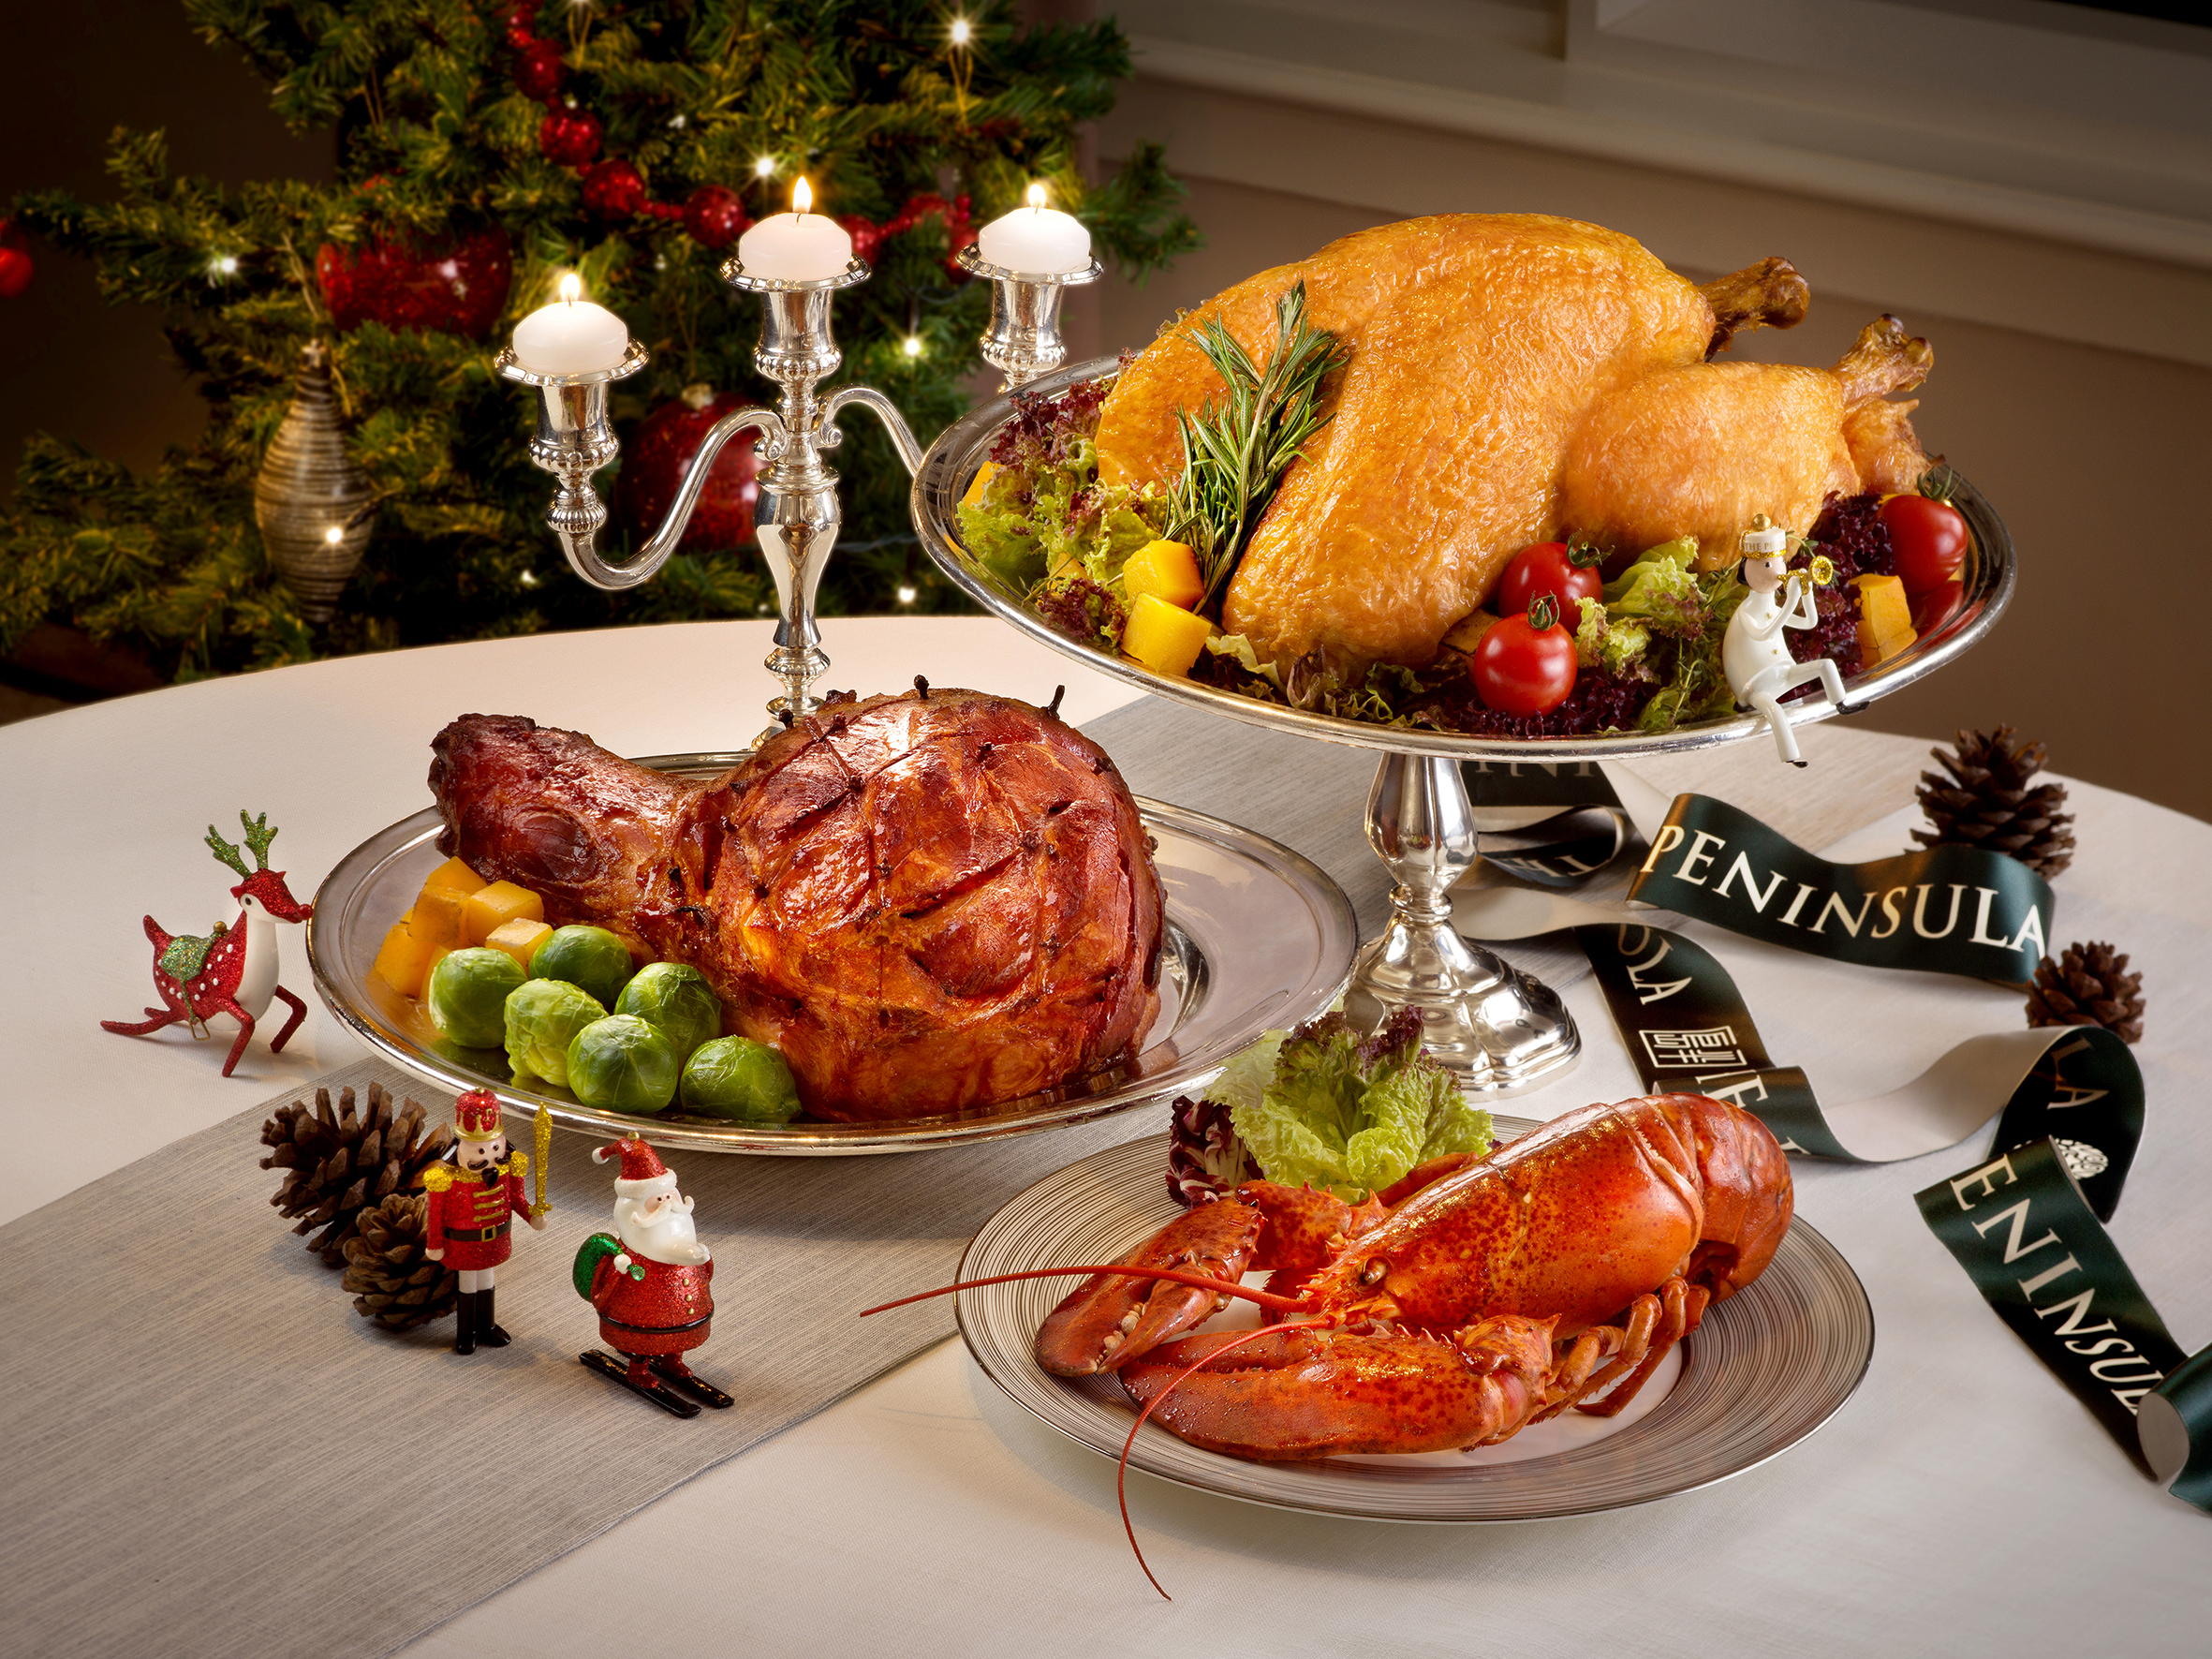 Festive Gourmet Food from The Peninsula Boutique